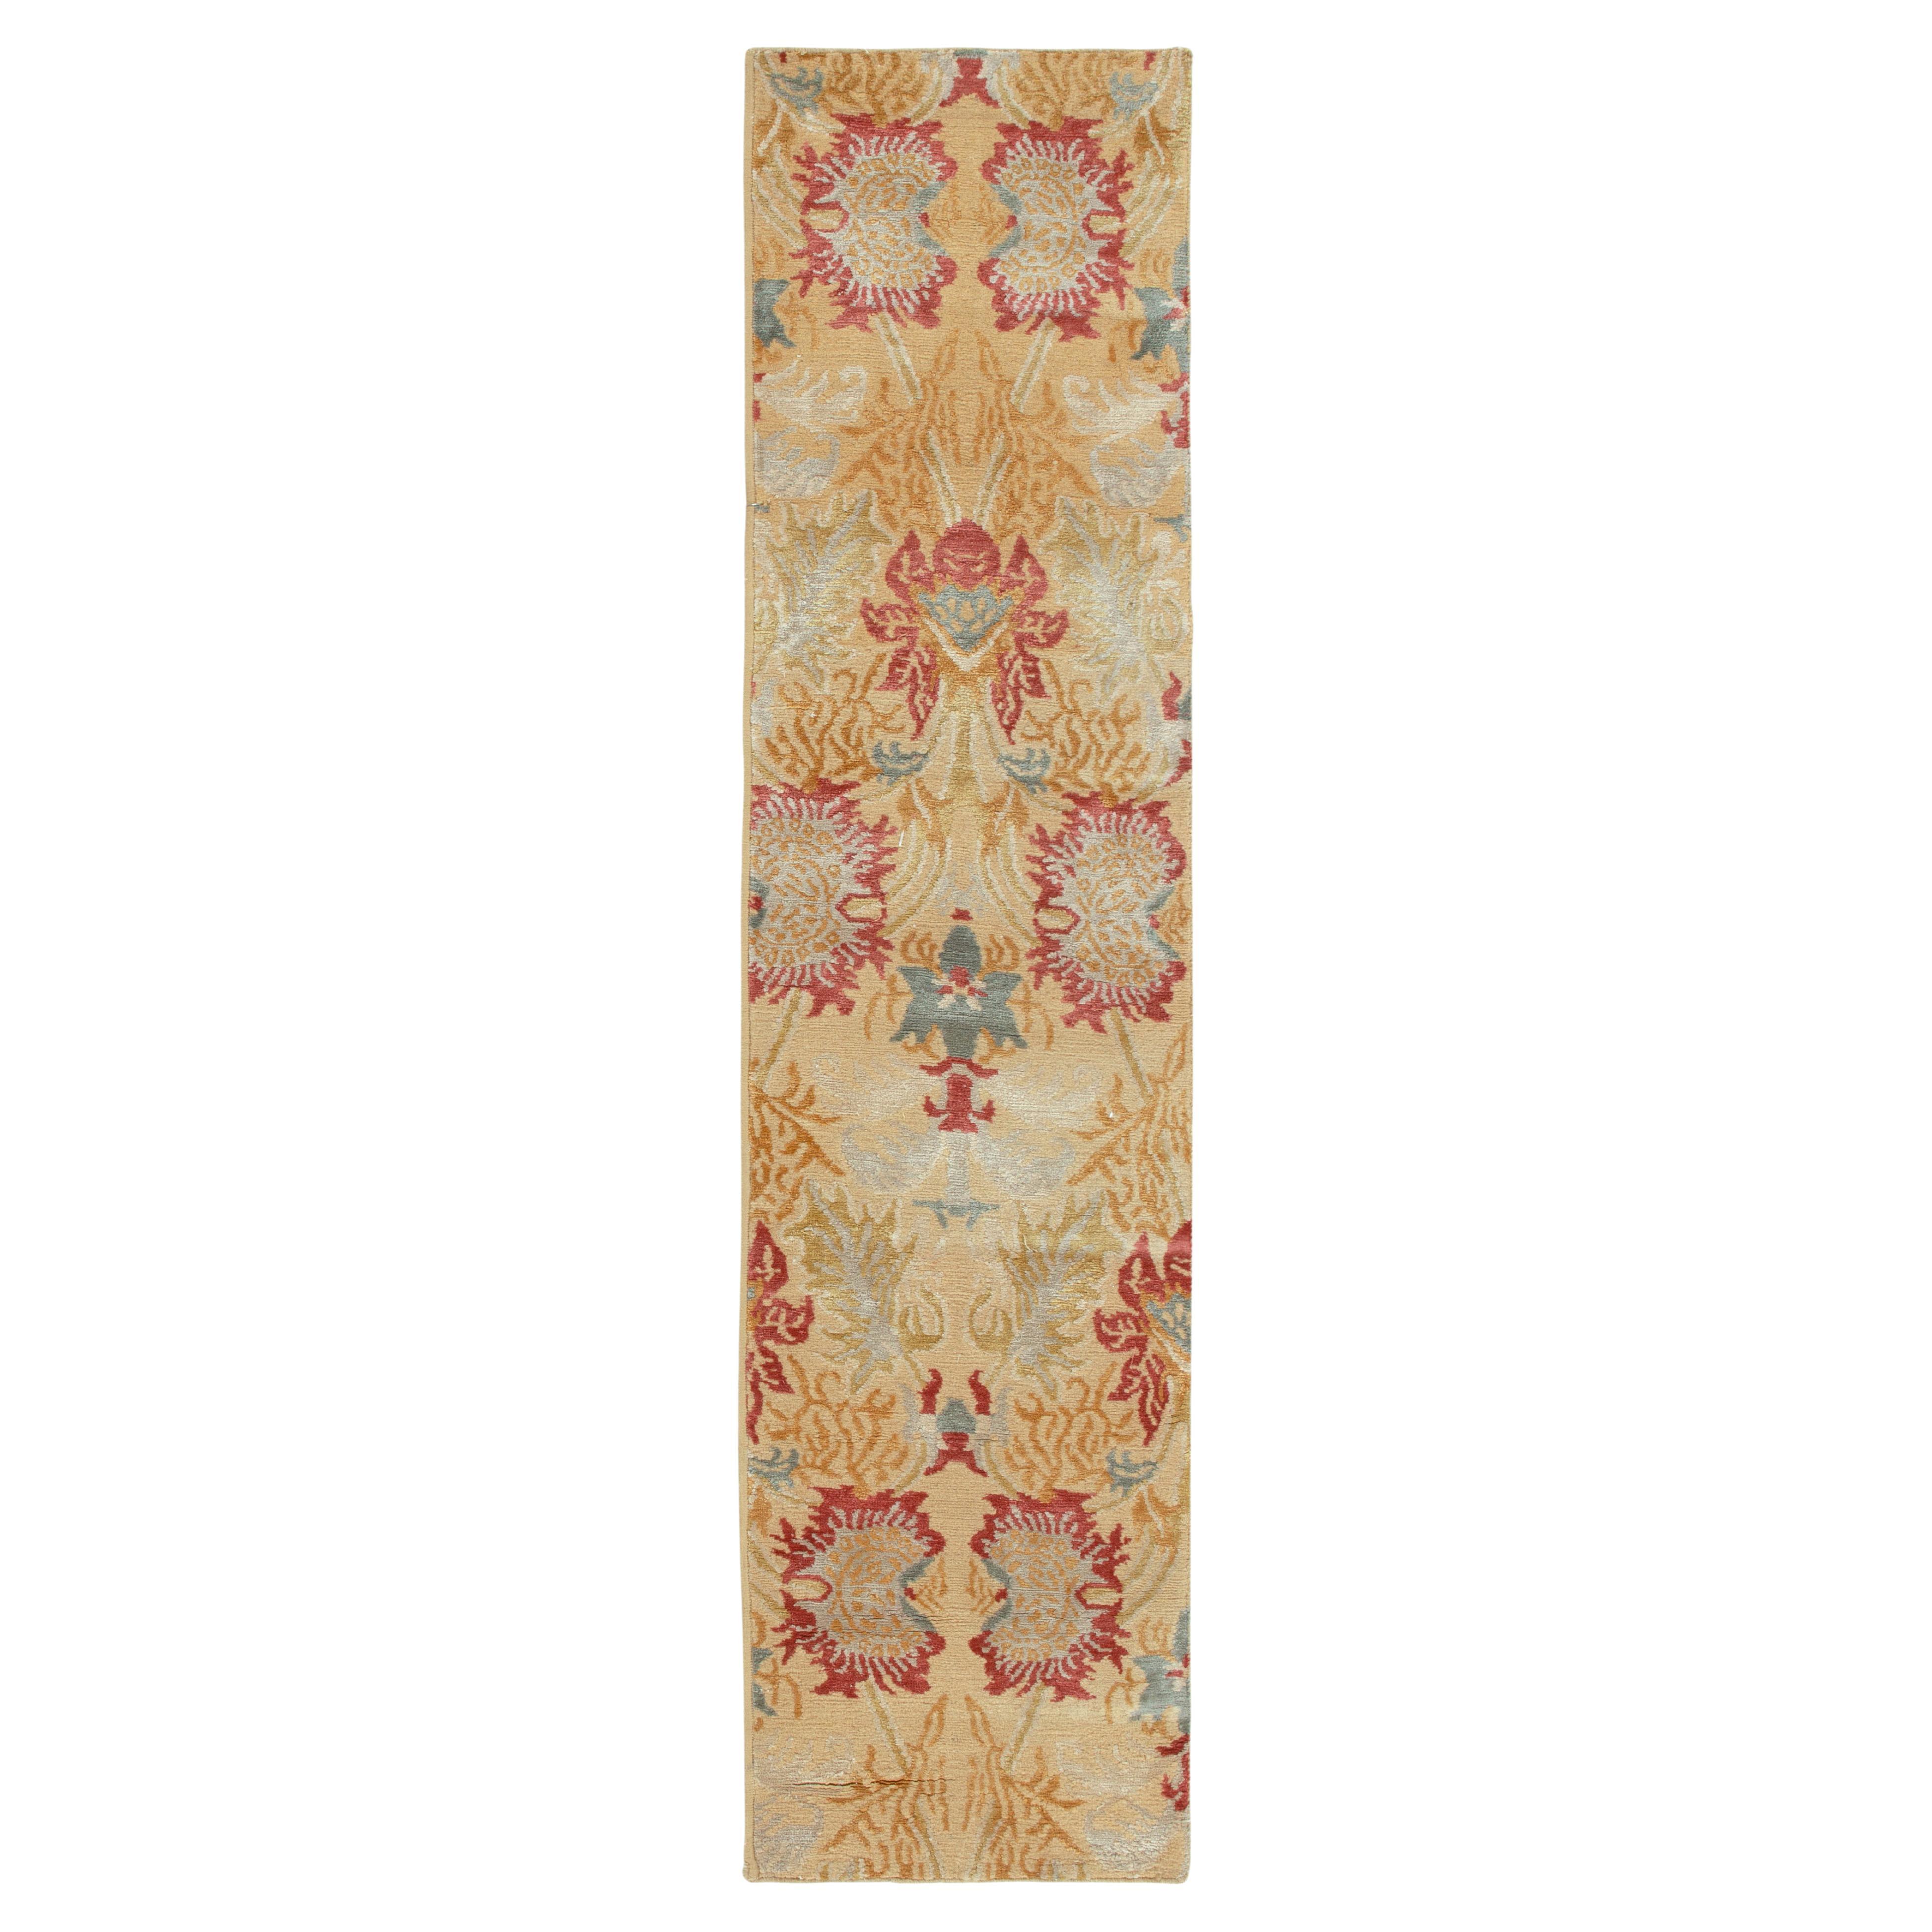 Rug & Kilim's Spanish European Style Runner in Gold, Red & Gray Floral Pattern